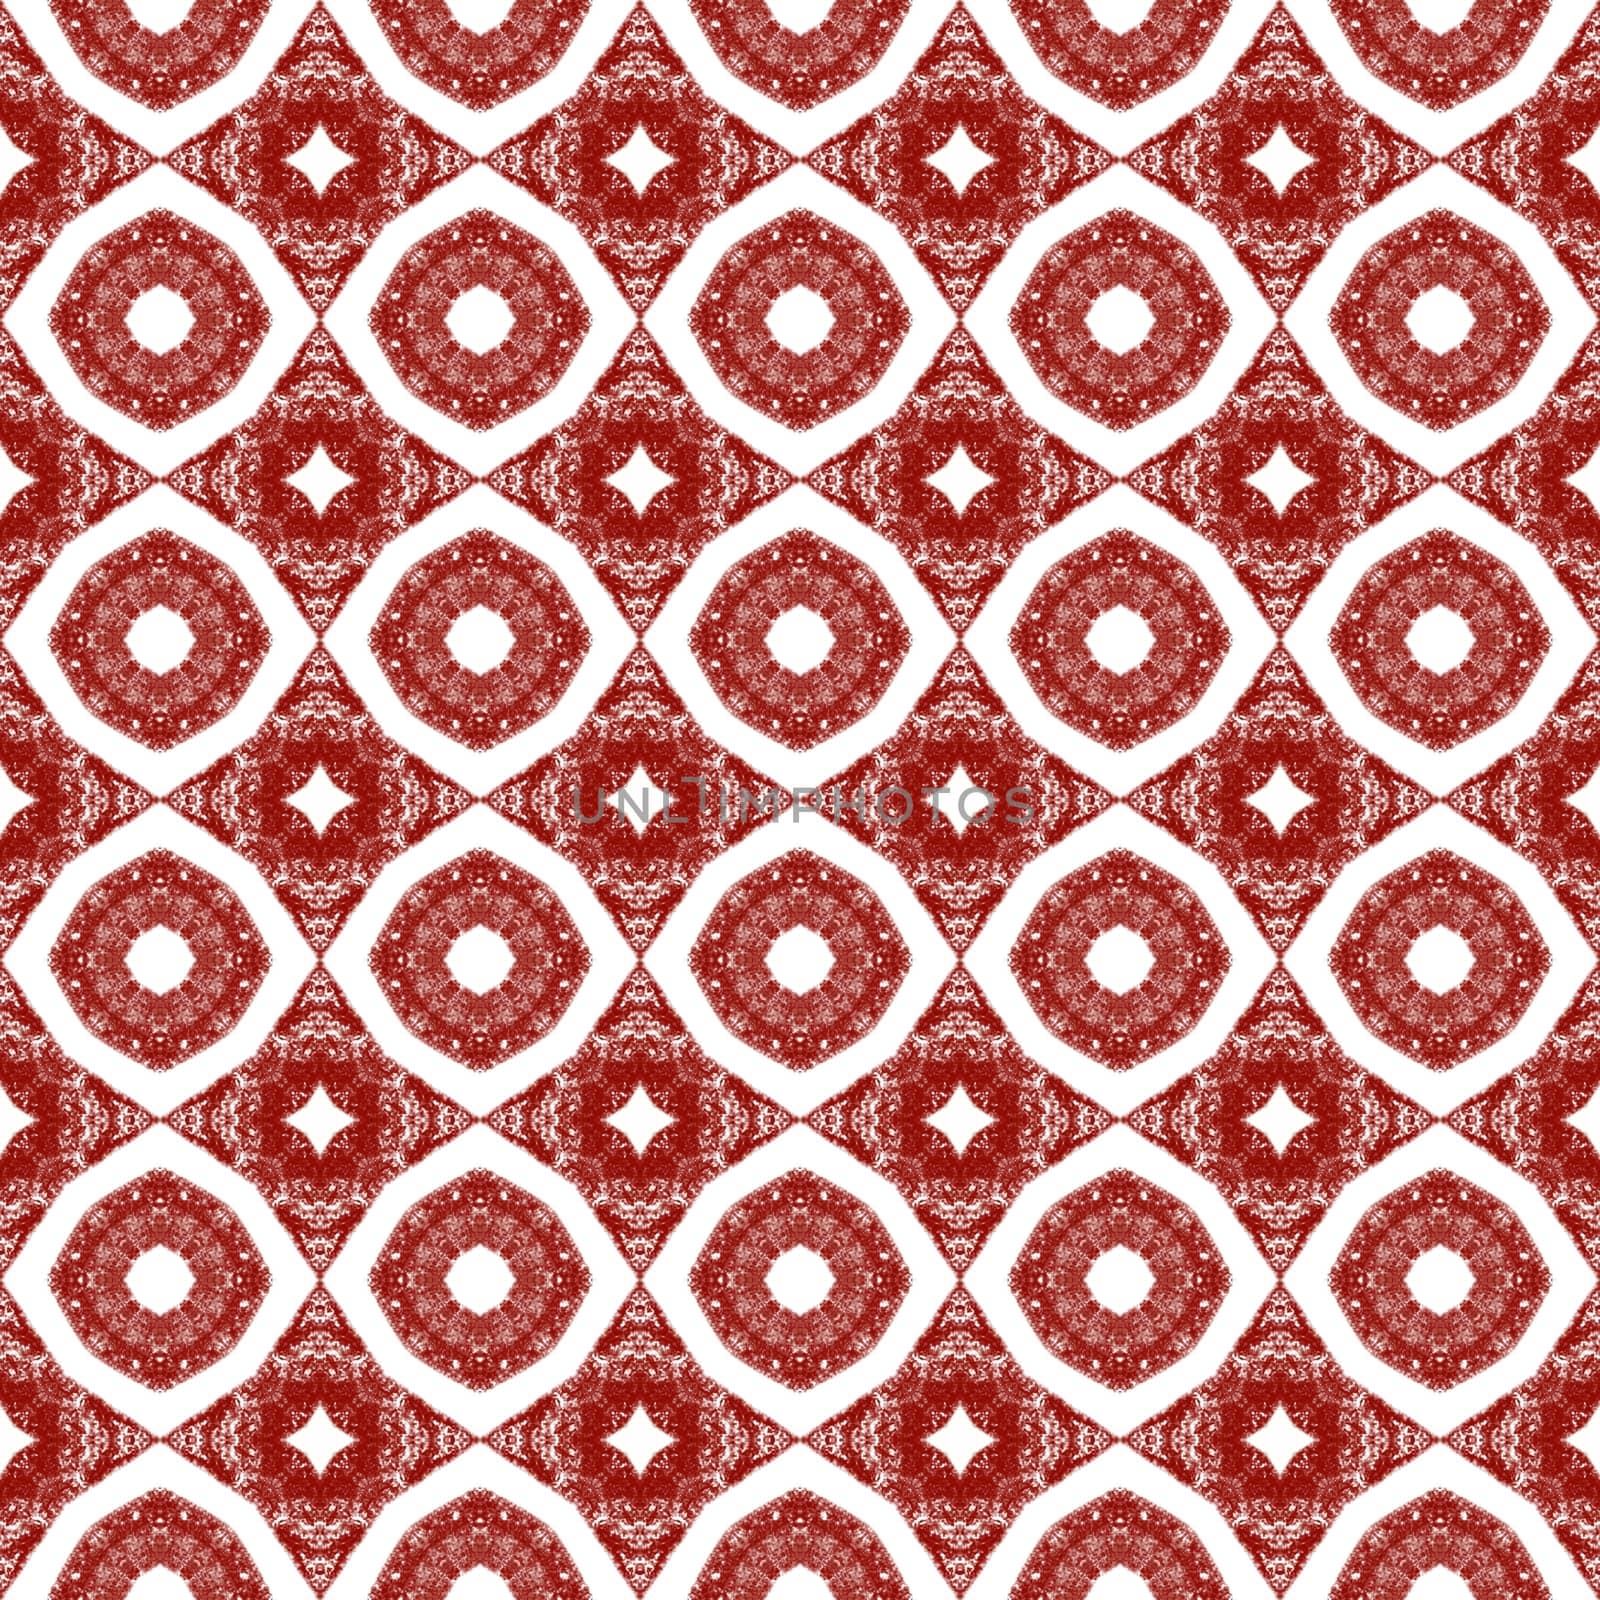 Medallion seamless pattern. Wine red symmetrical by beginagain